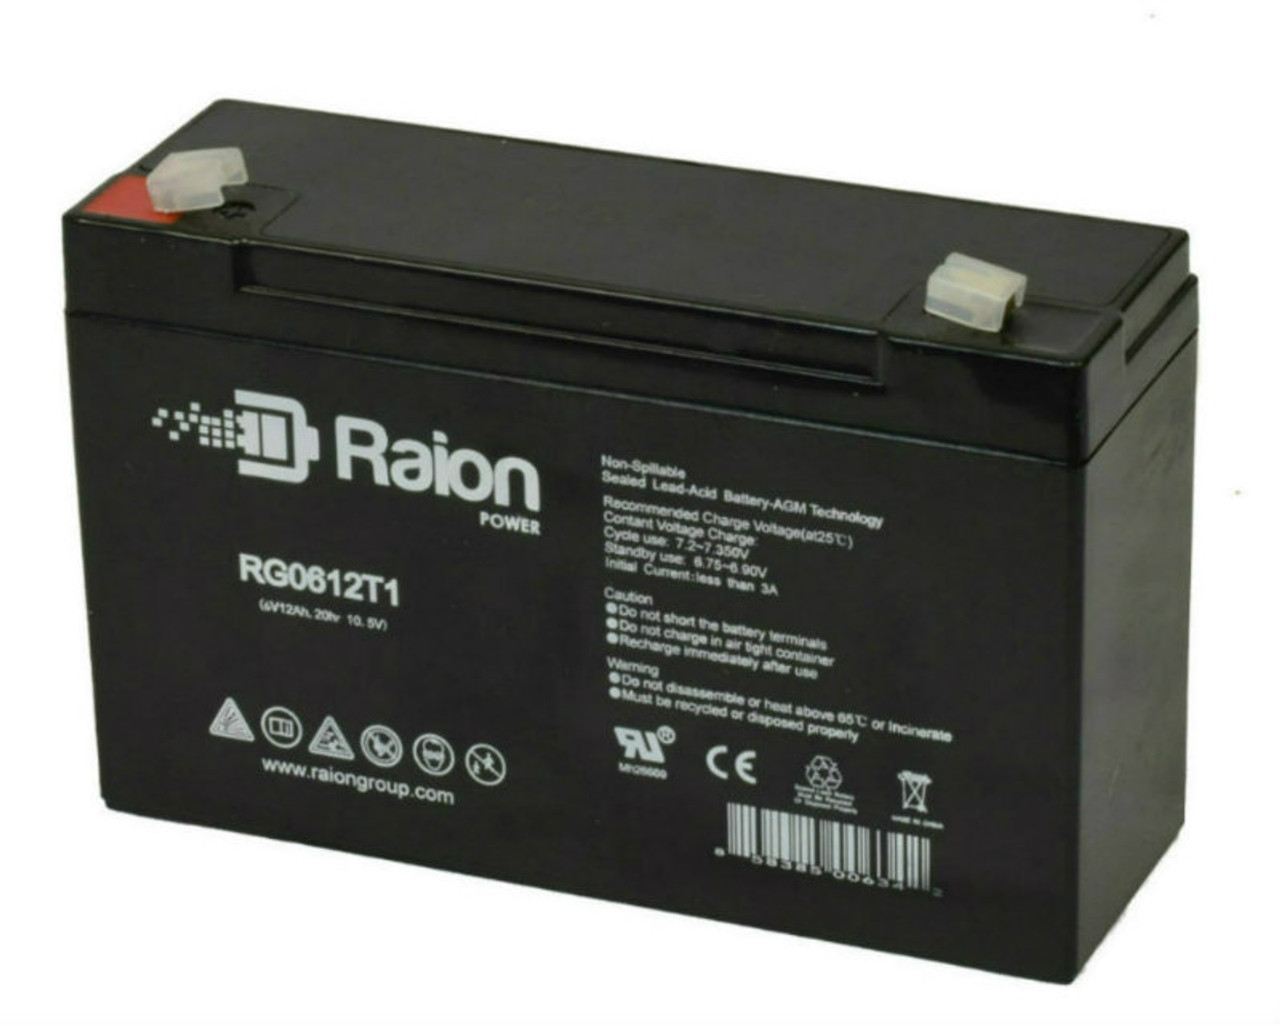 Raion Power RG06120T1 Replacement 6V 12Ah Emergency Light Battery for Holophane M22